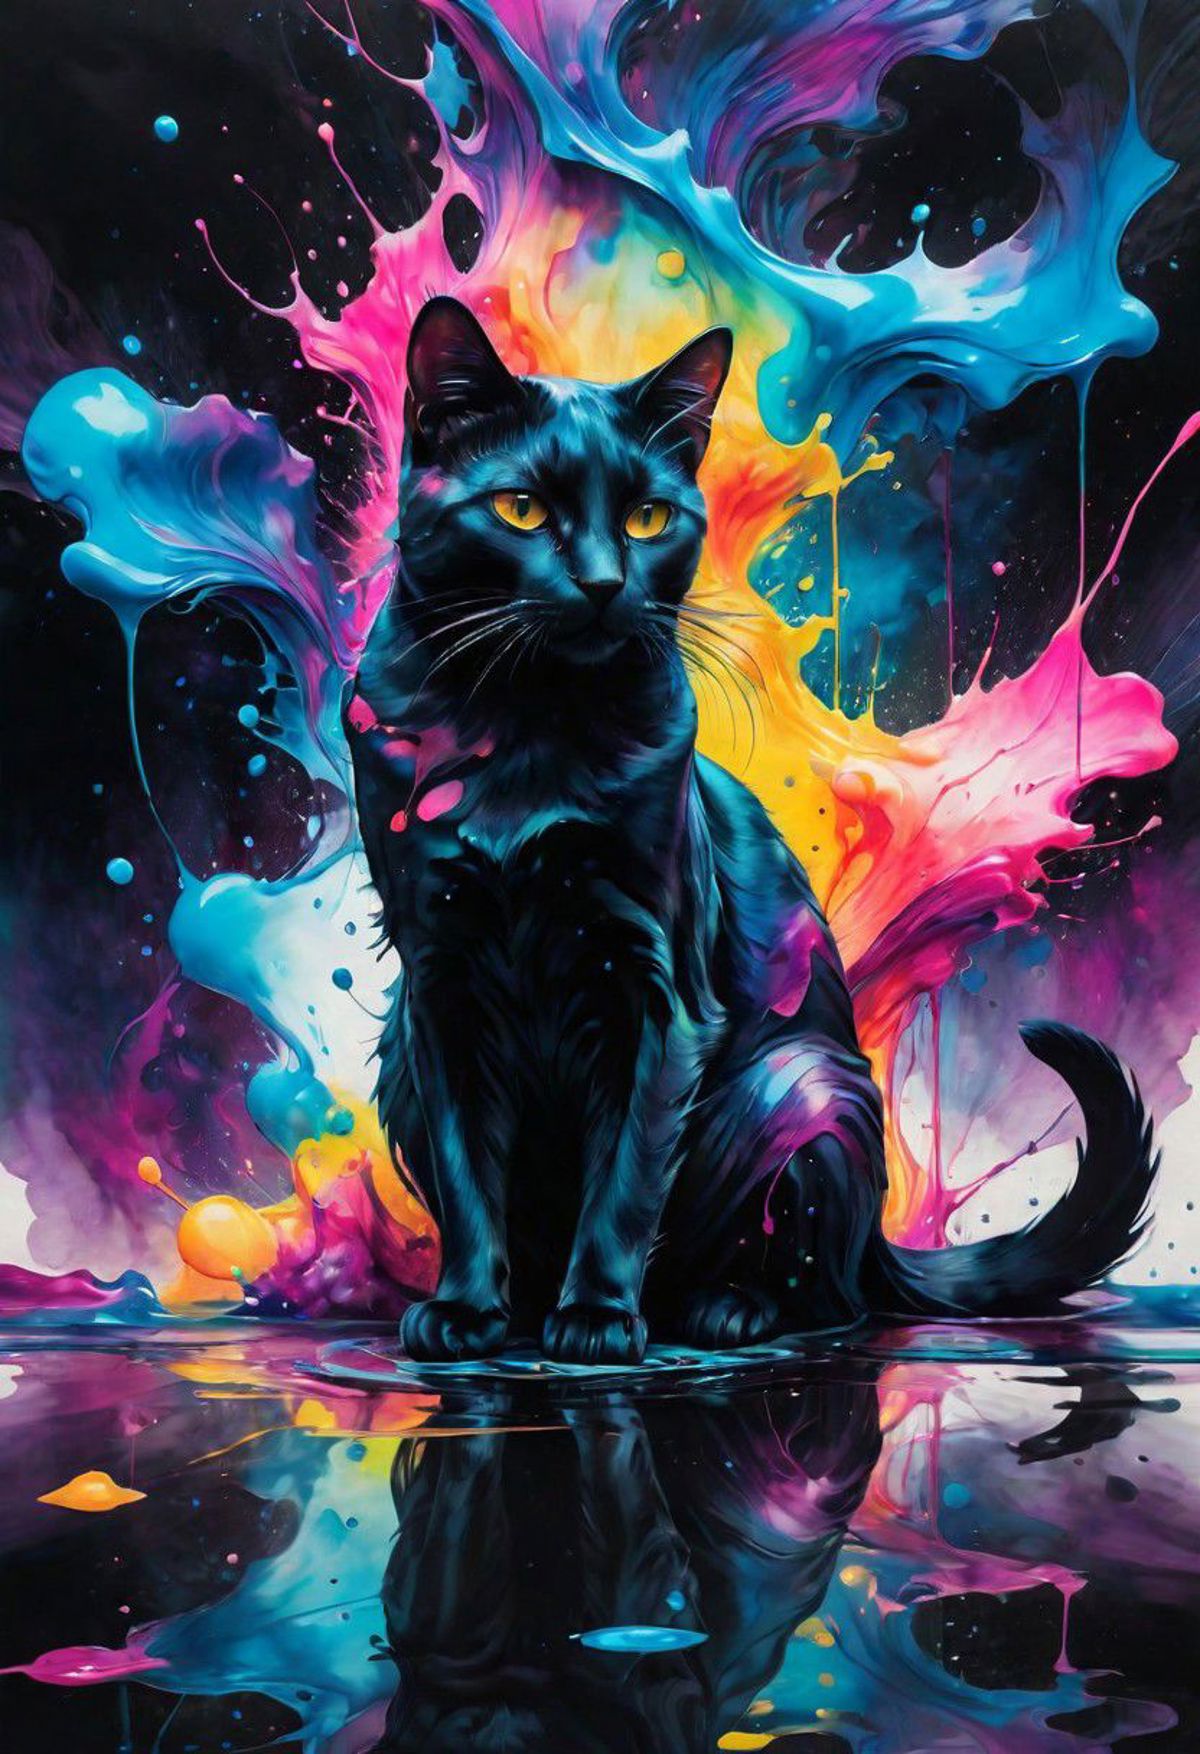 A black cat sitting on a splash of colorful paint.